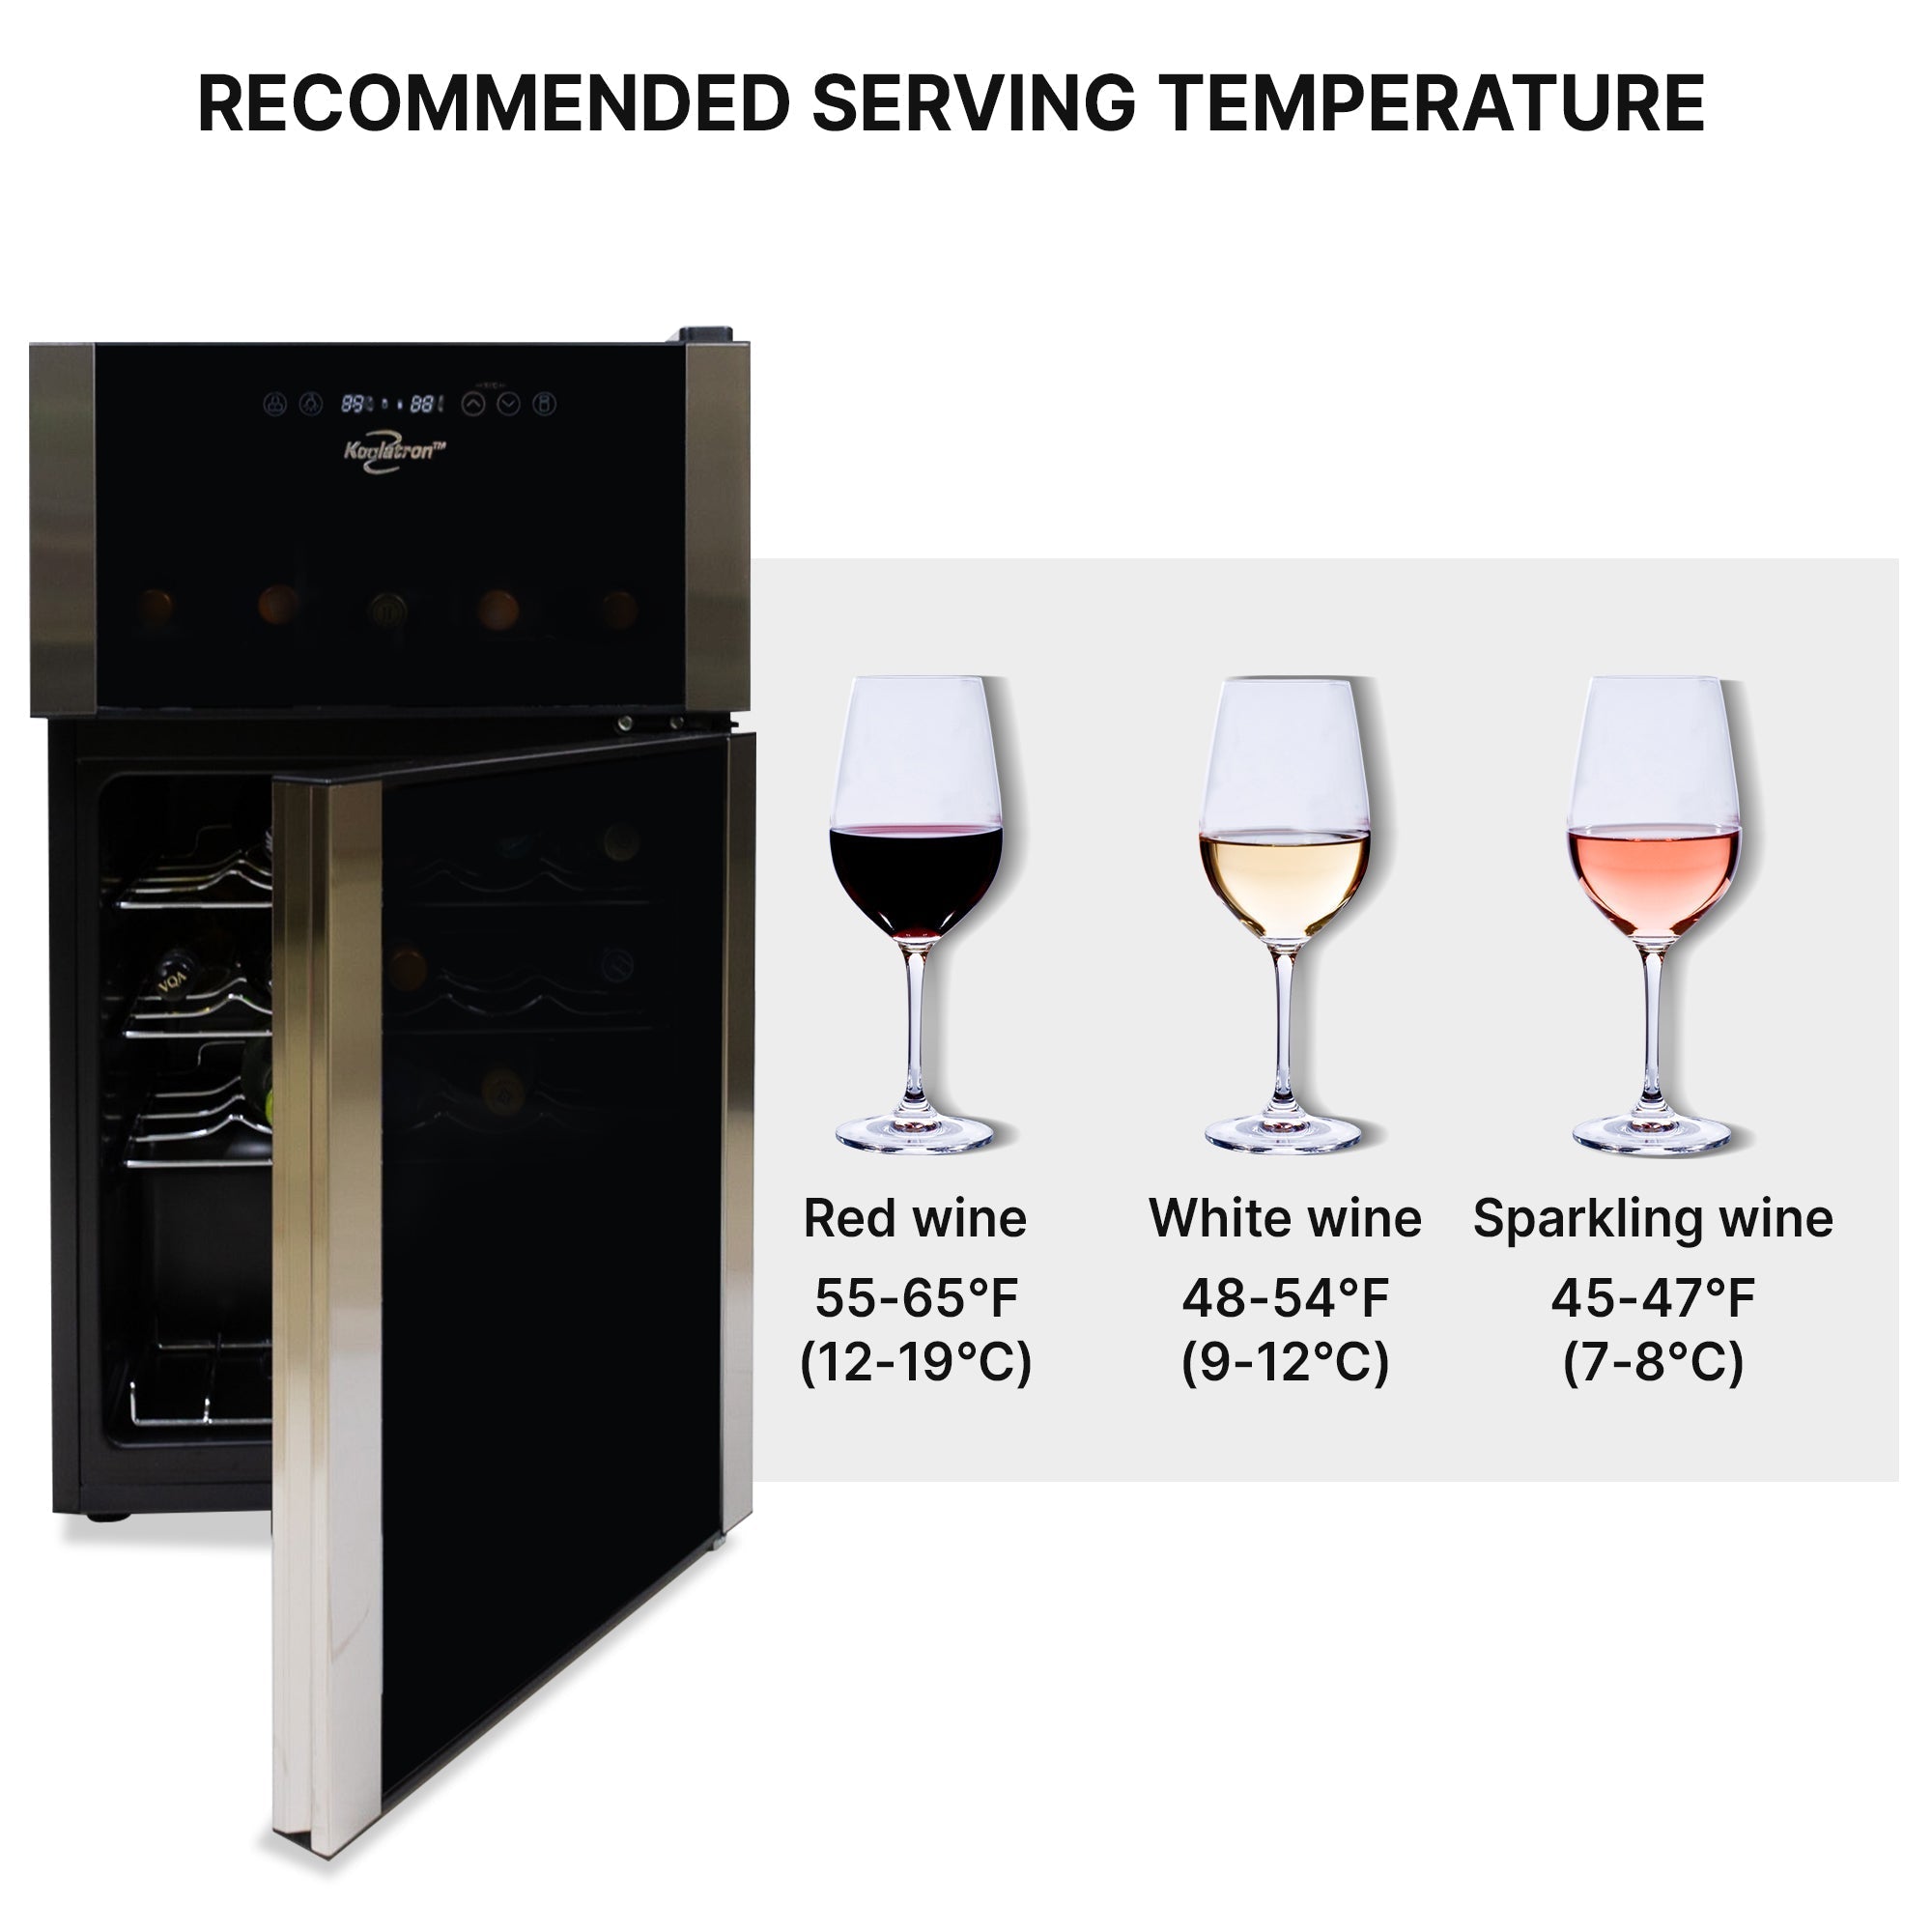 Koolatron 29 bottle compressor wine fridge, open, with pictures of three wine glasses to the right containing red, white, and rose wines; Text above reads "Recommended serving temperature" and text below each glass describes the ideal temperature